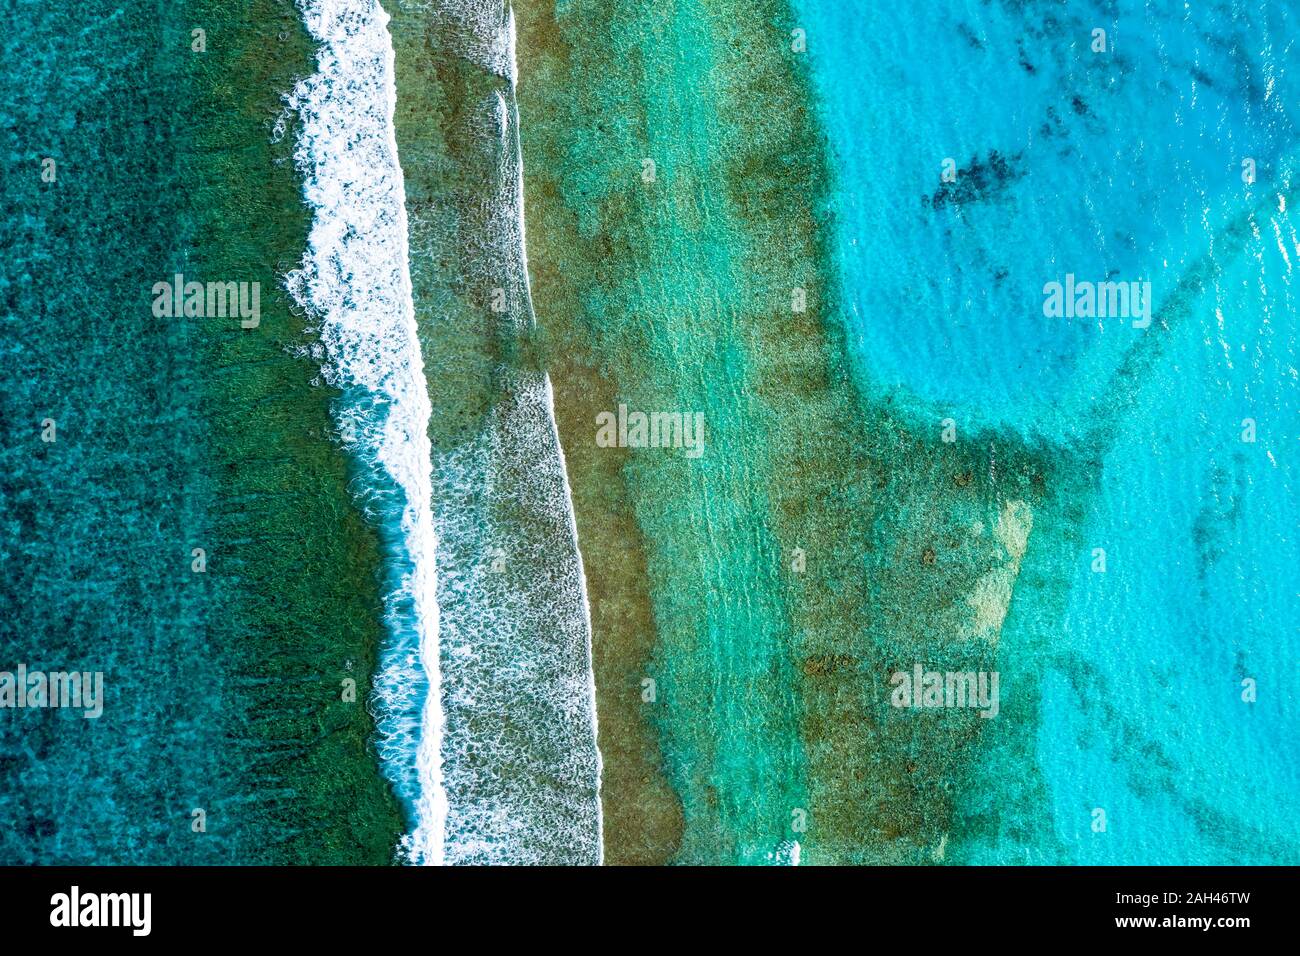 Maldives, South Male Atoll, Aerial view of coral reef Stock Photo